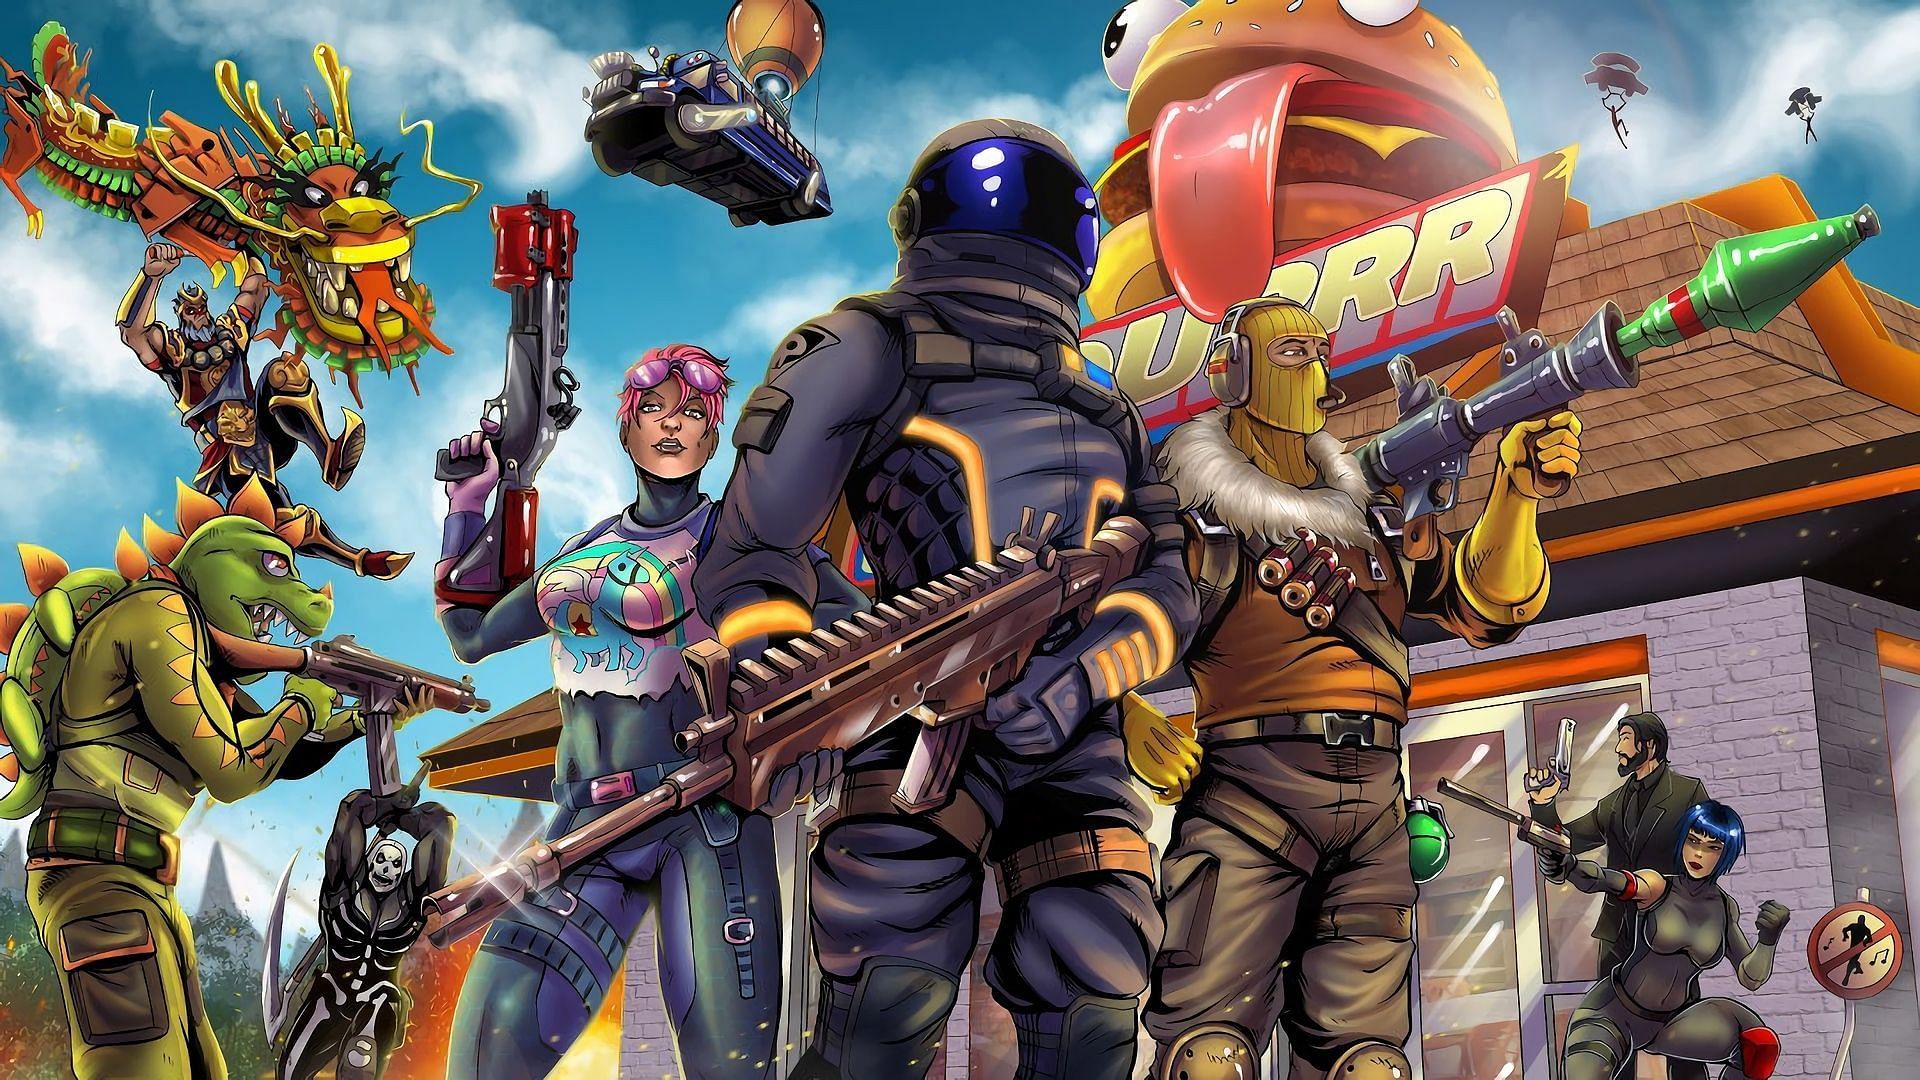 Teaming up in Fortnite will invite a ban (Image via Pinterest)